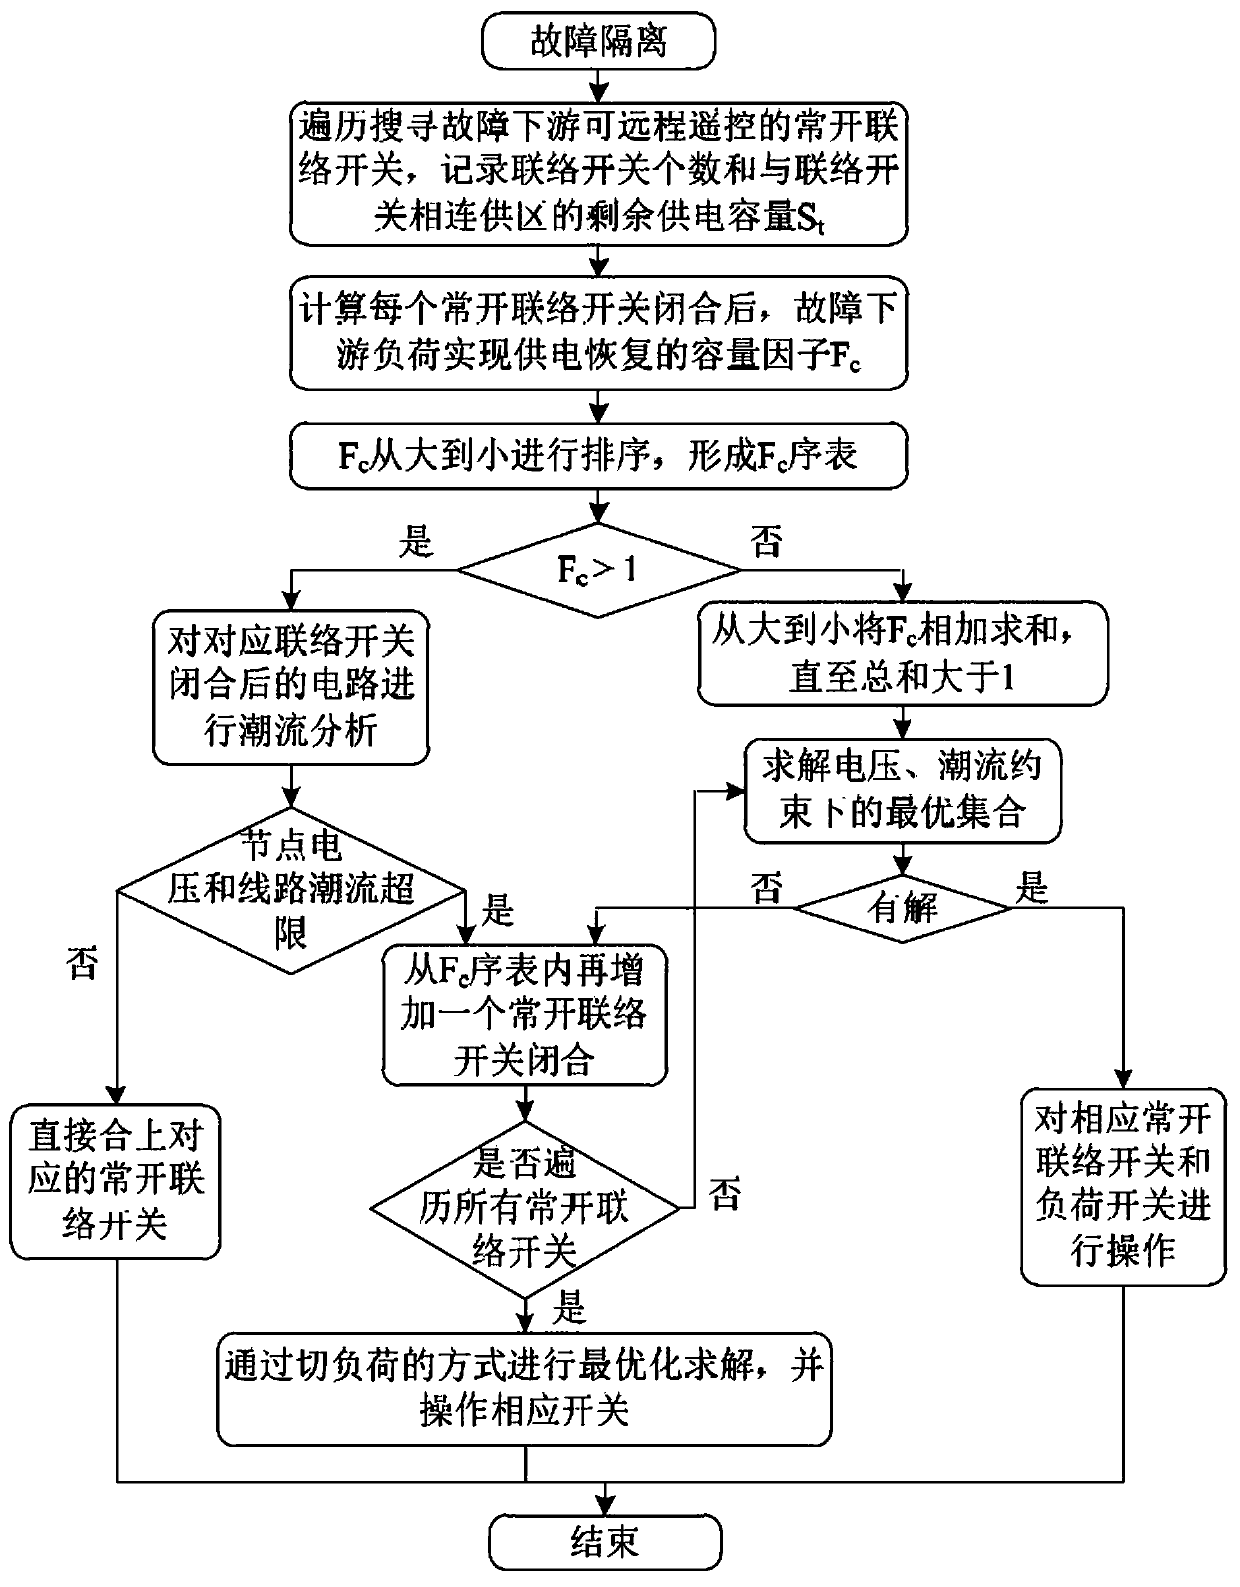 Intelligent power supply recovery method for self-healing of power distribution network